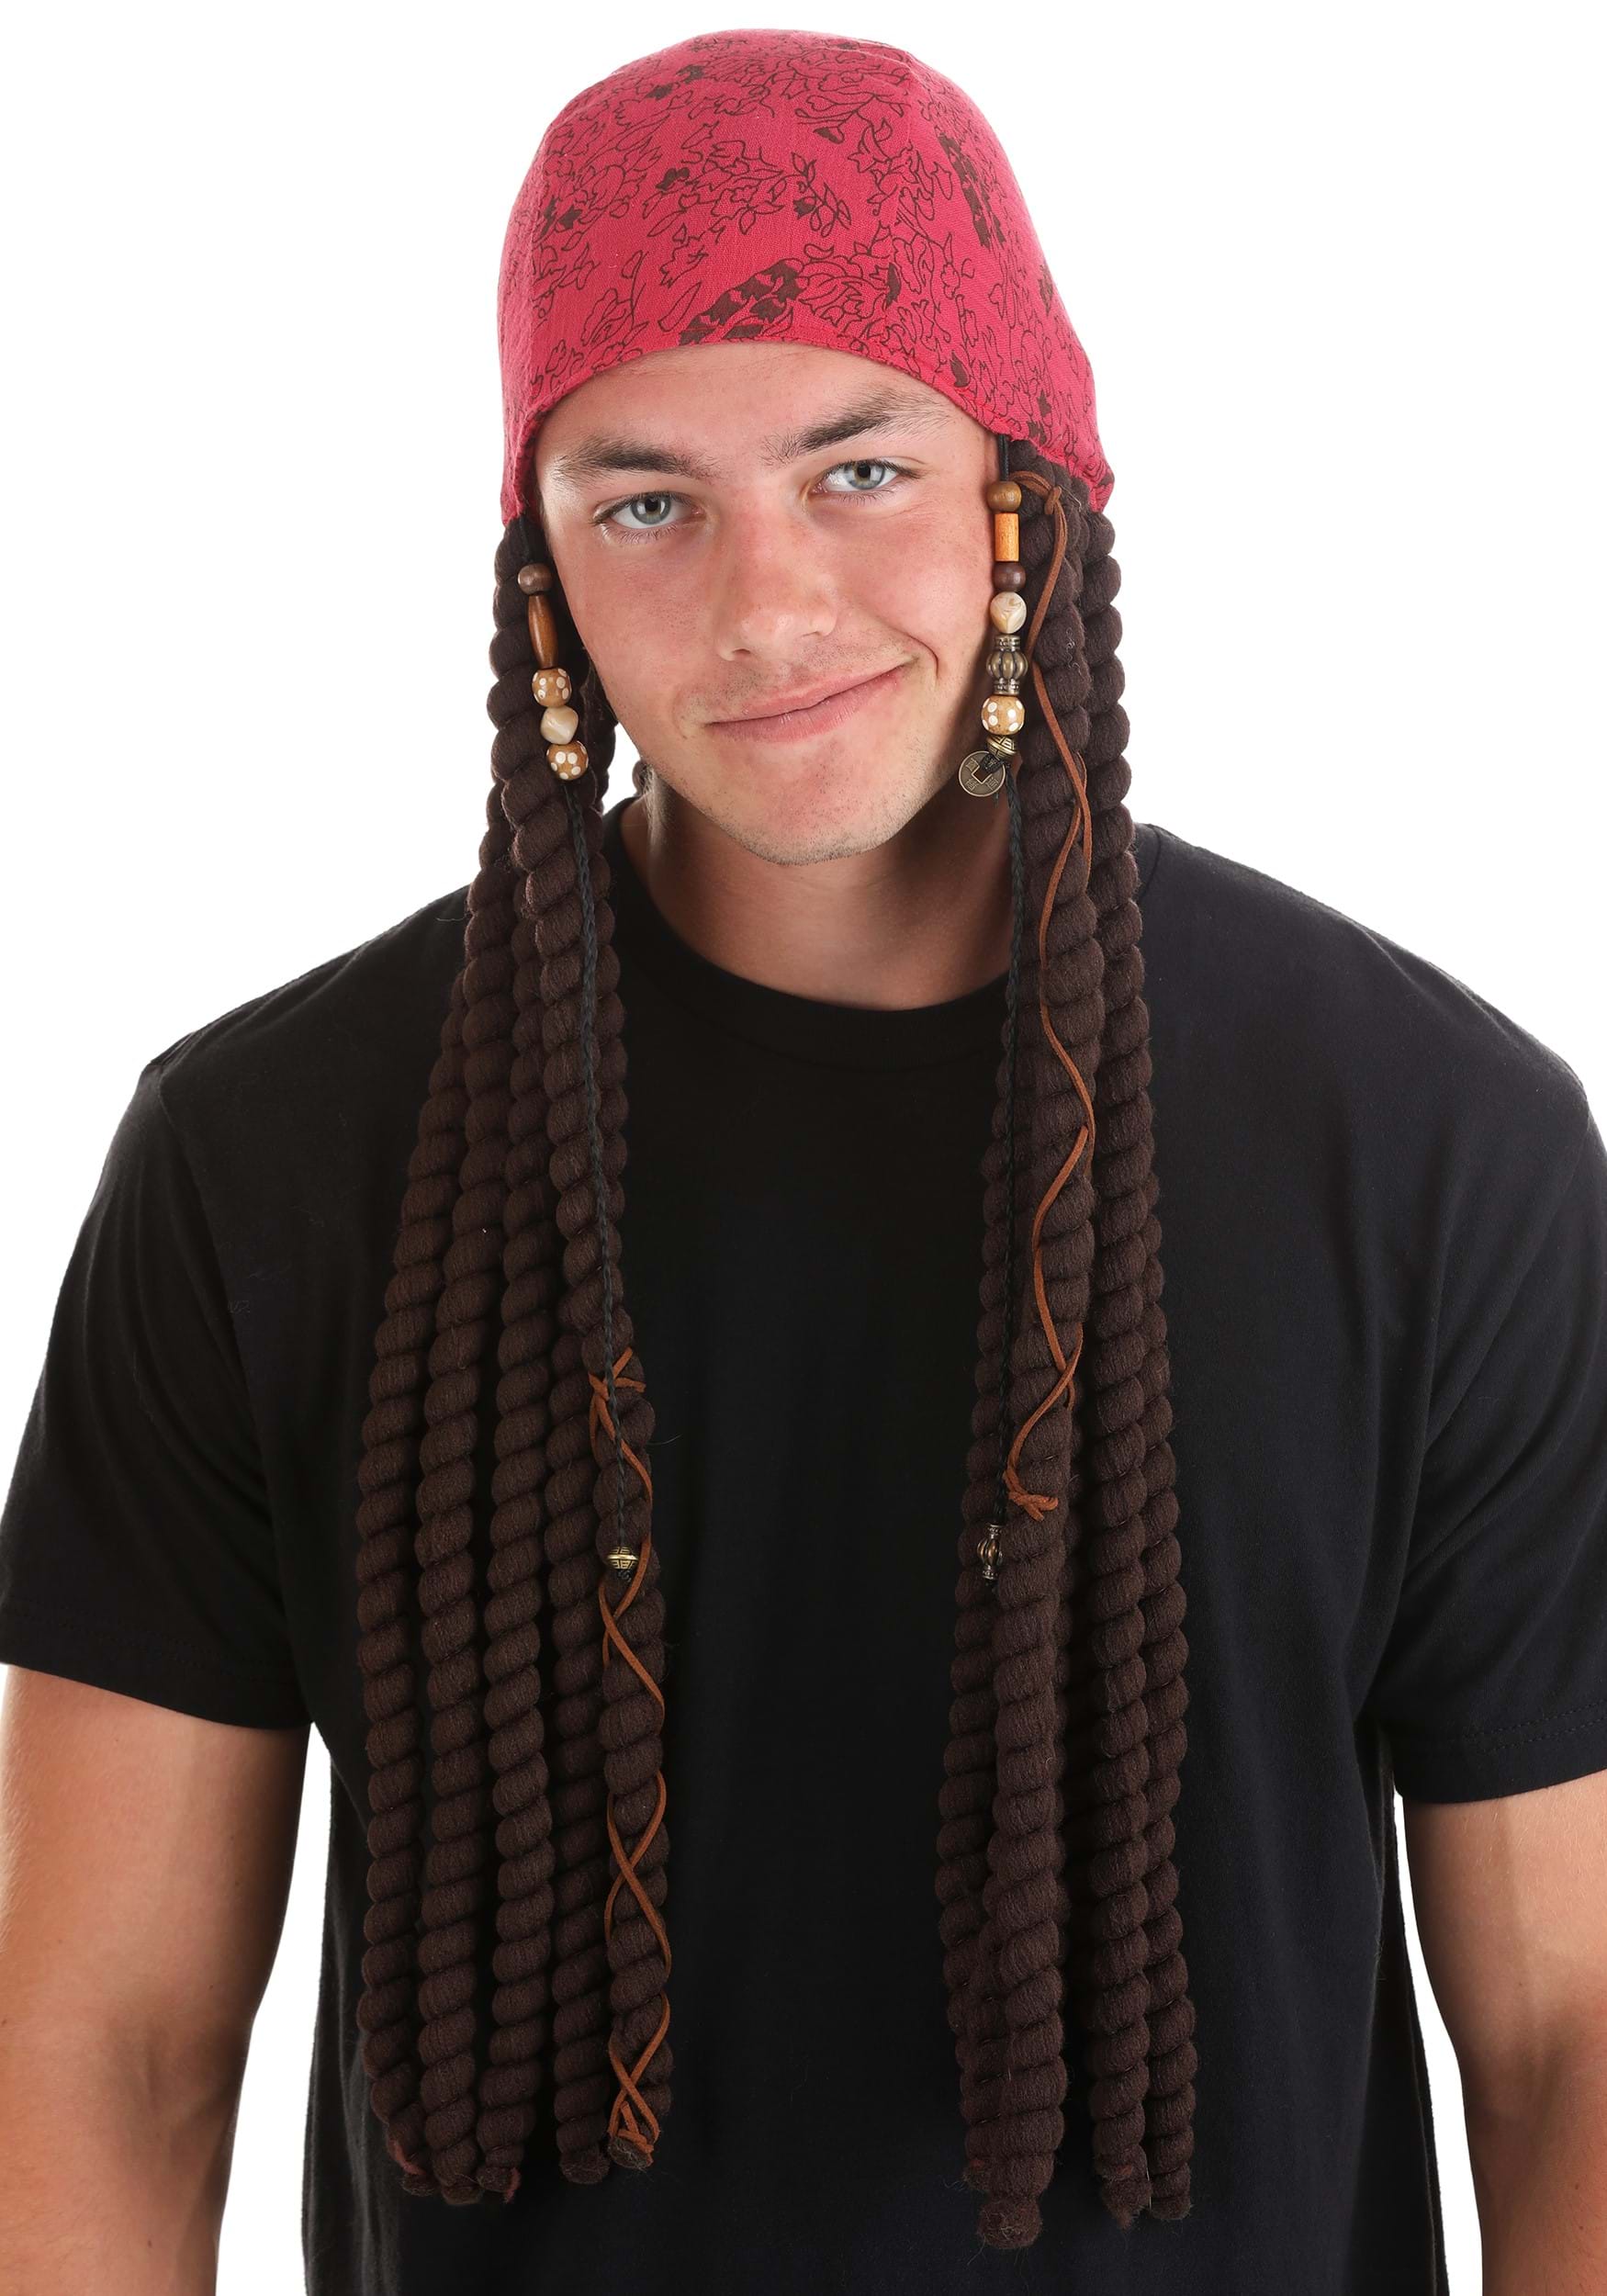 Jack Sparrow and Dreads Set for